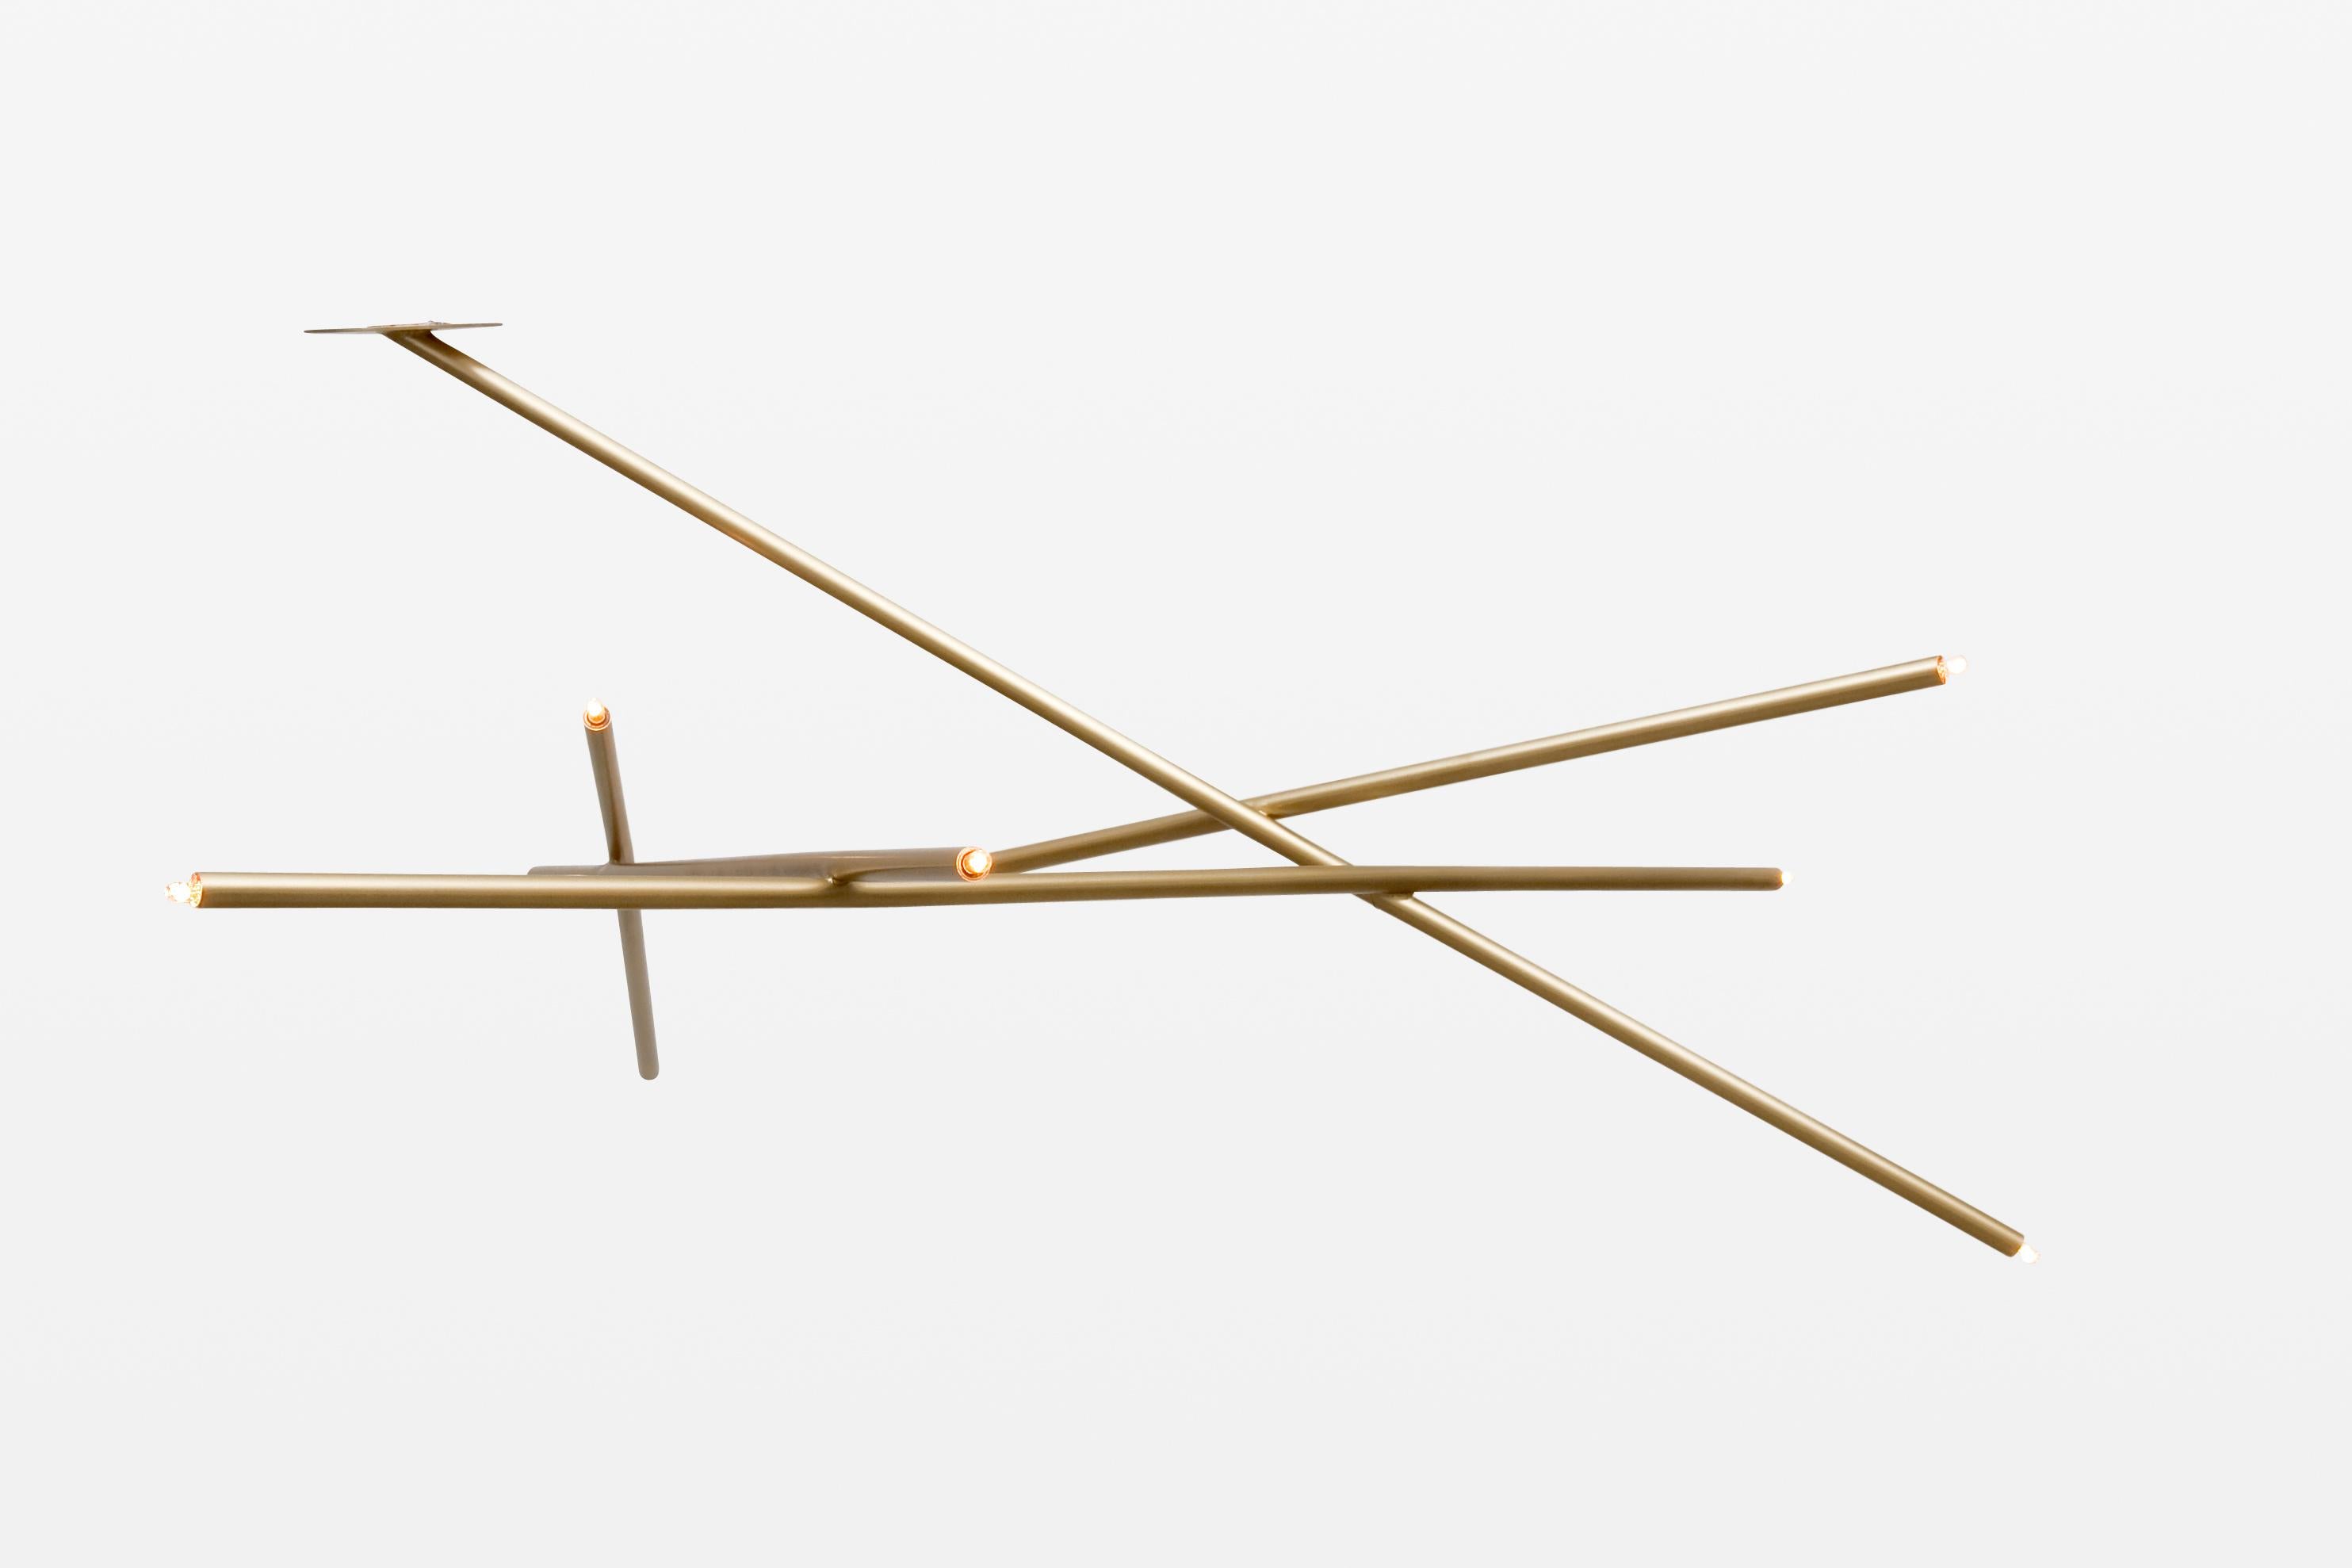 Measurements: 56 W x 56 D x 33 H inches
Drop length 33 inches.
Canopy 6 W x .25 H inches.
Shown in brushed brass.

Dimensions and finishes may be customized.
Prices may vary depending on finishes and options.

The Pick Up Stick collection